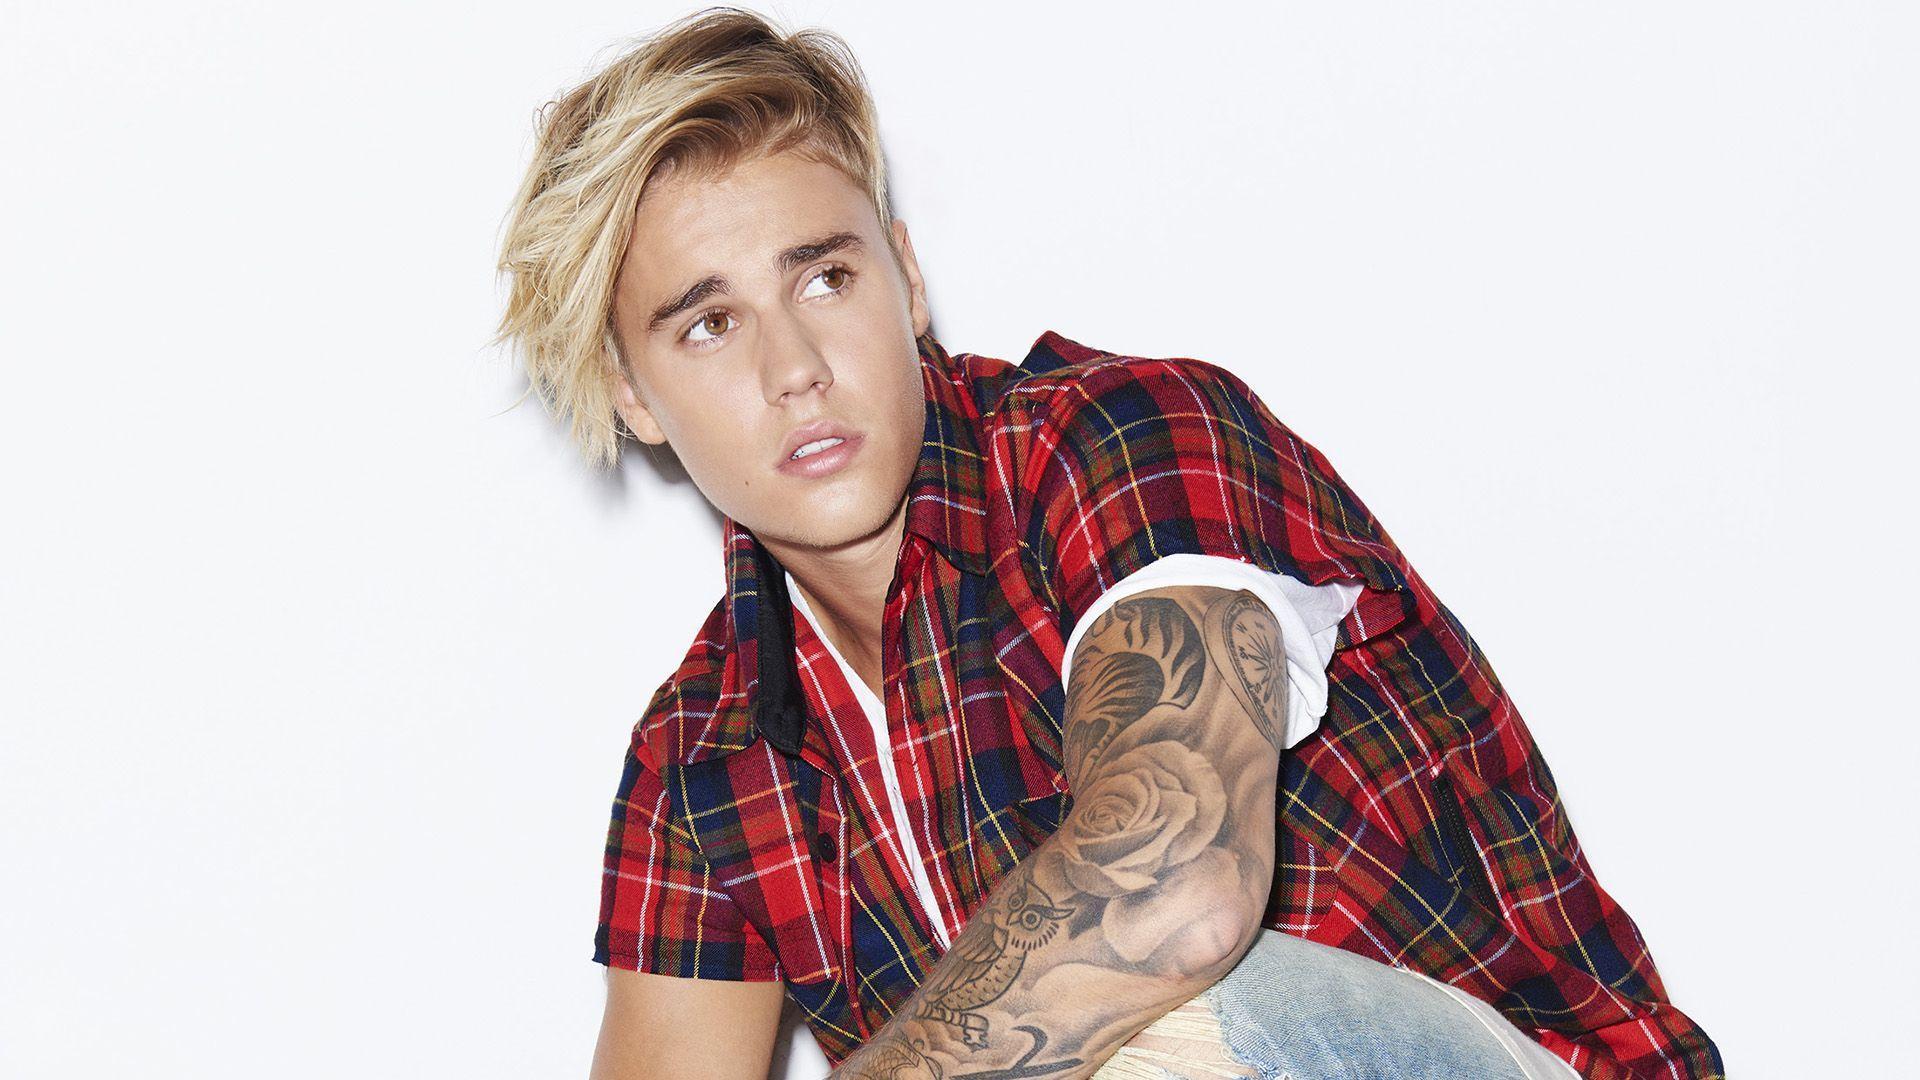 Justin Bieber&;s taking over TODAY: Interview and concert dates set